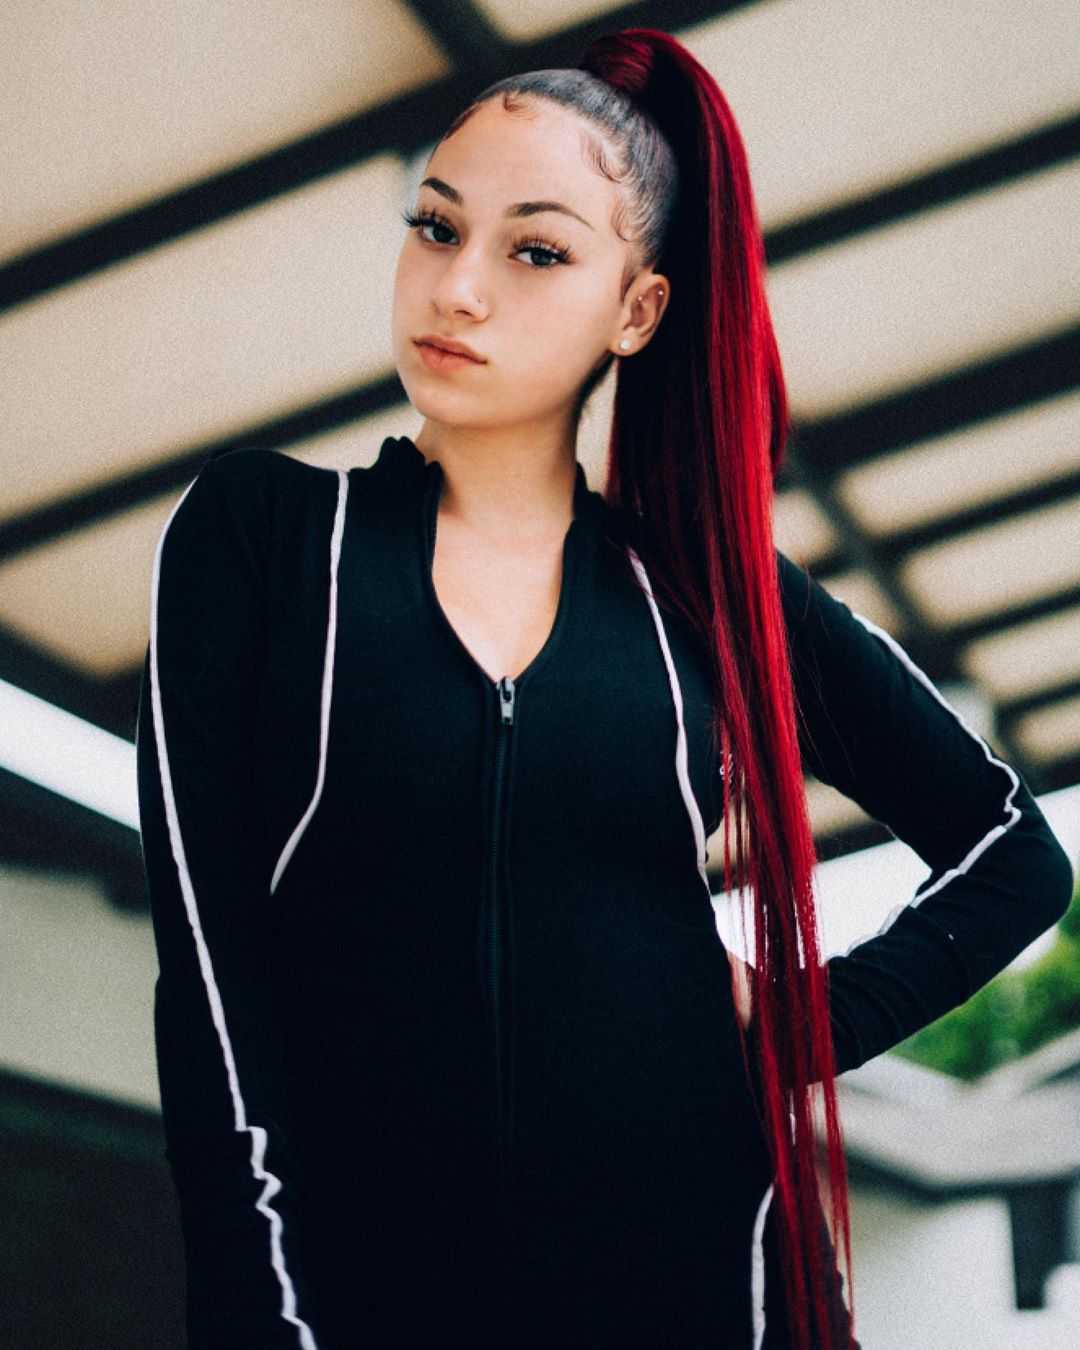 70+ Hot Pictures Of Danielle Bregoli aka Bhad Bhabie Which Will Win Your Heart 269